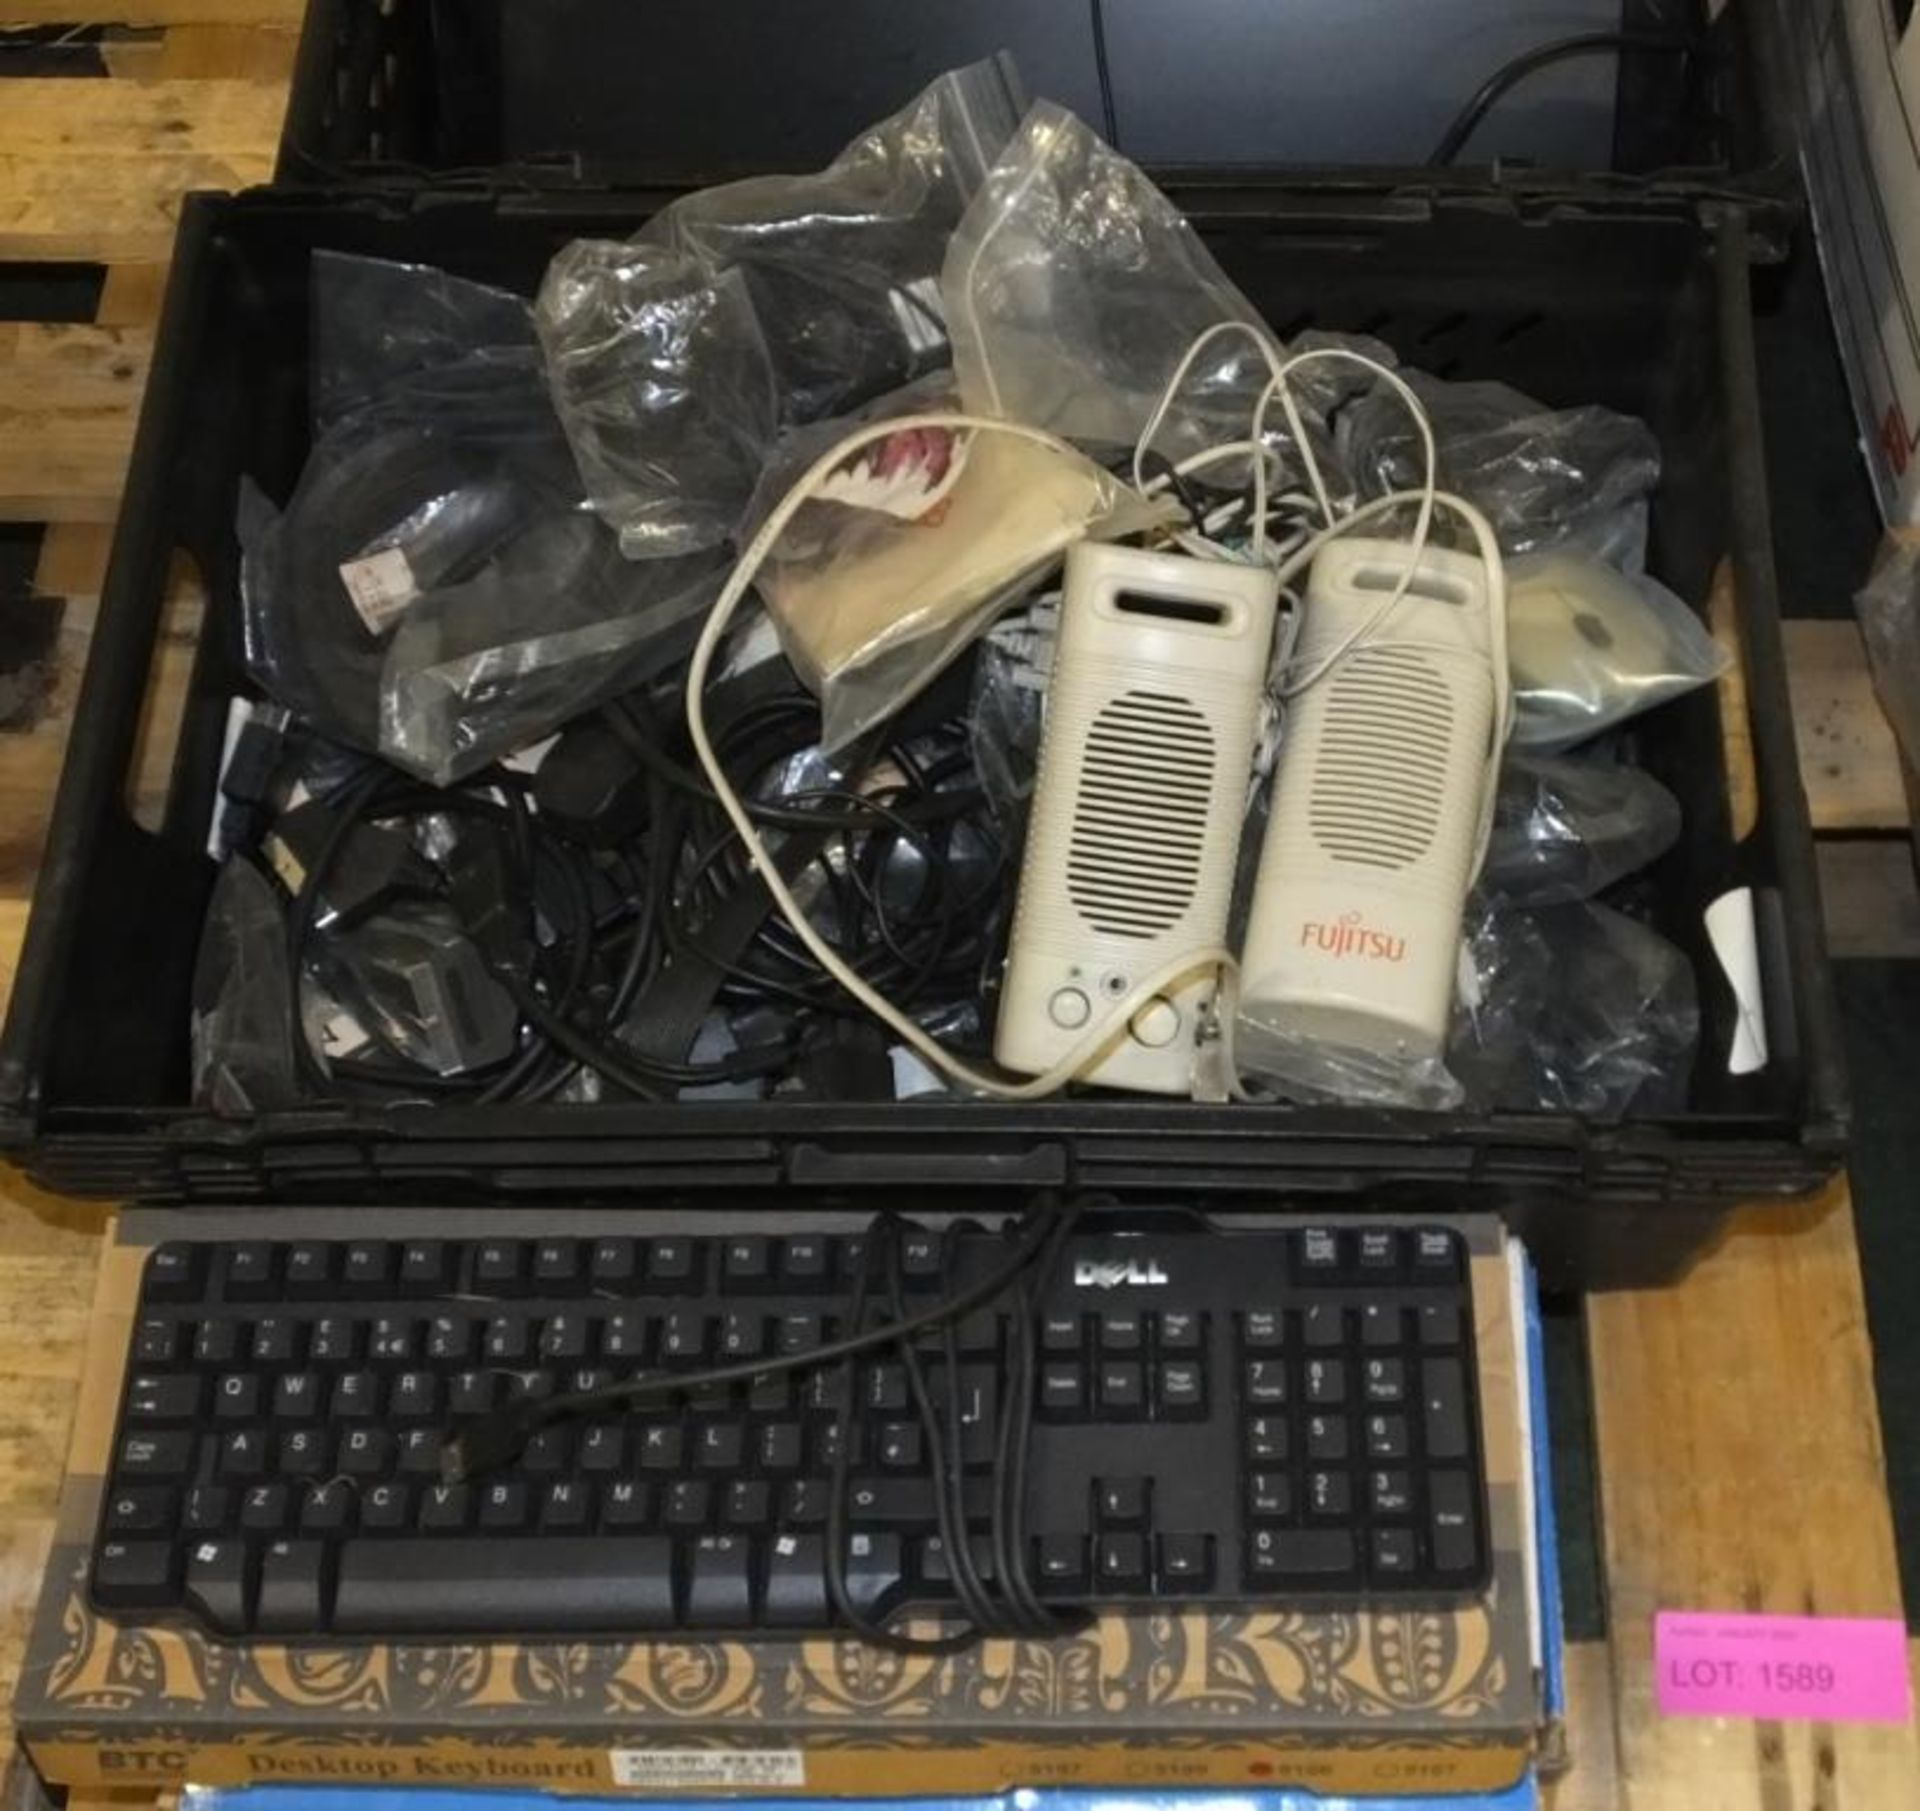 Computer Keyboards, Leads, Monitors. - Image 4 of 4